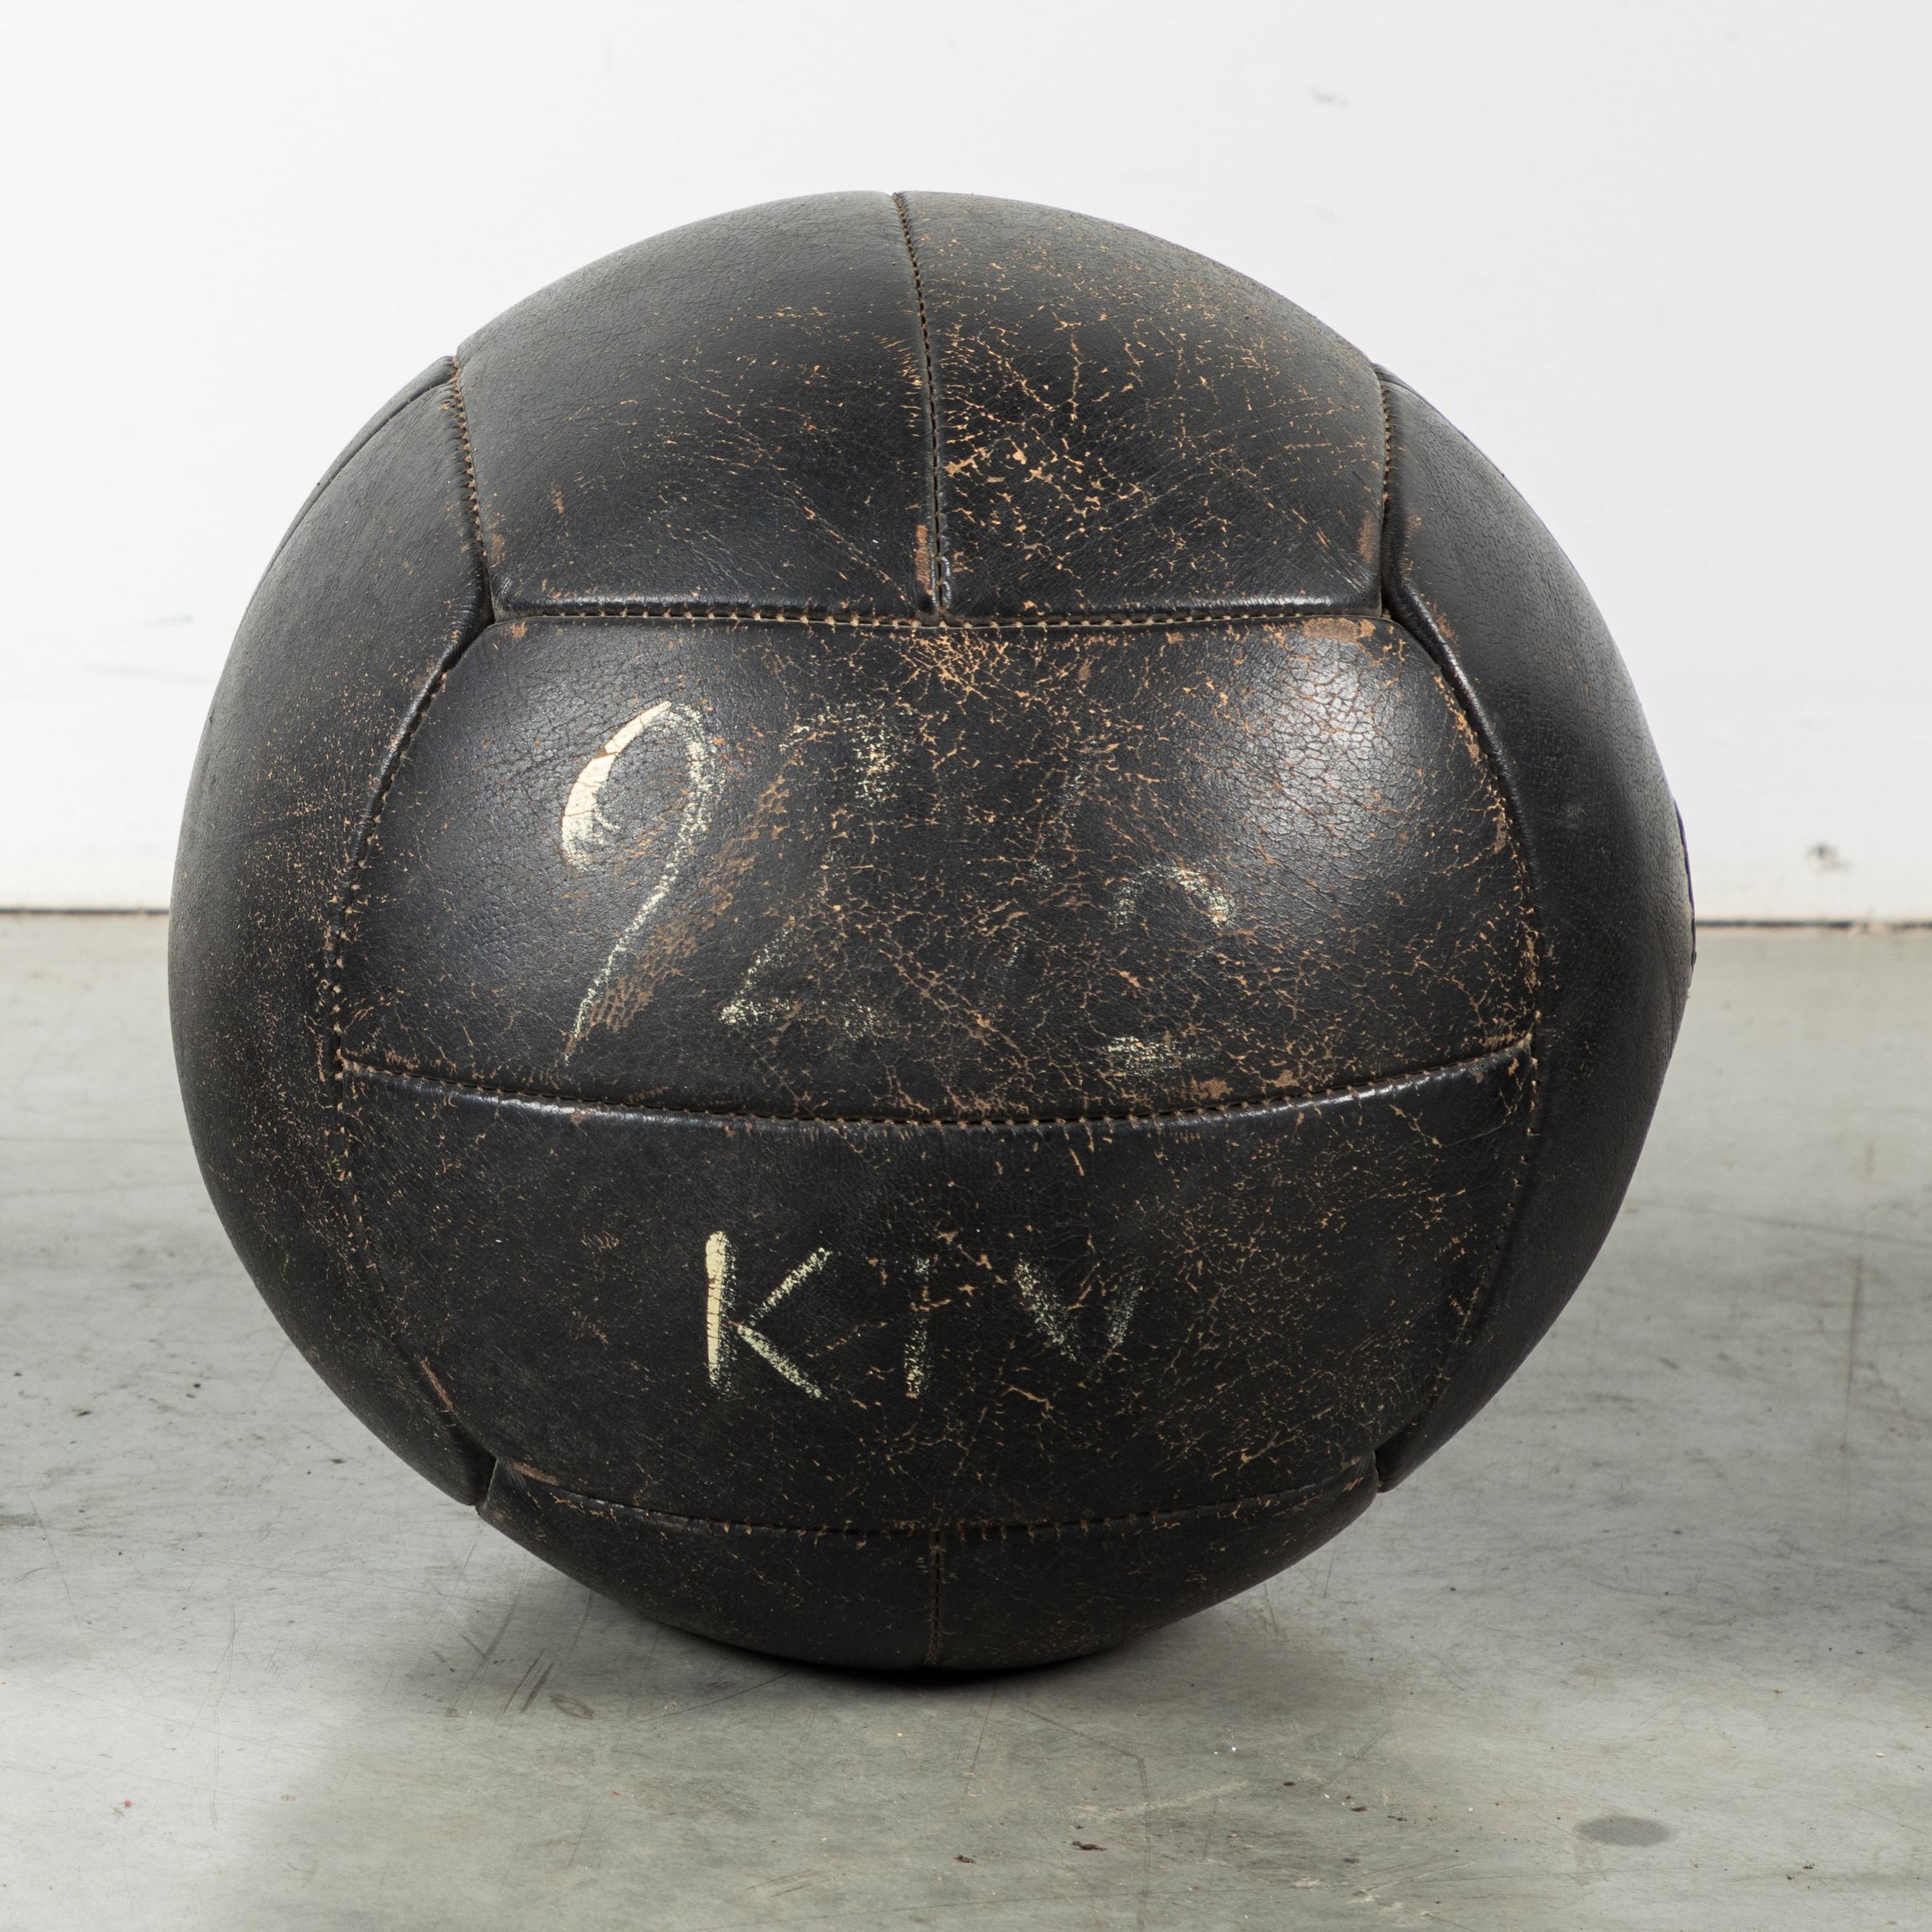 Great vintage collection of three black leather medicine balls. Excellent warm vintage patina. Traces of white painted team letters and numbers.